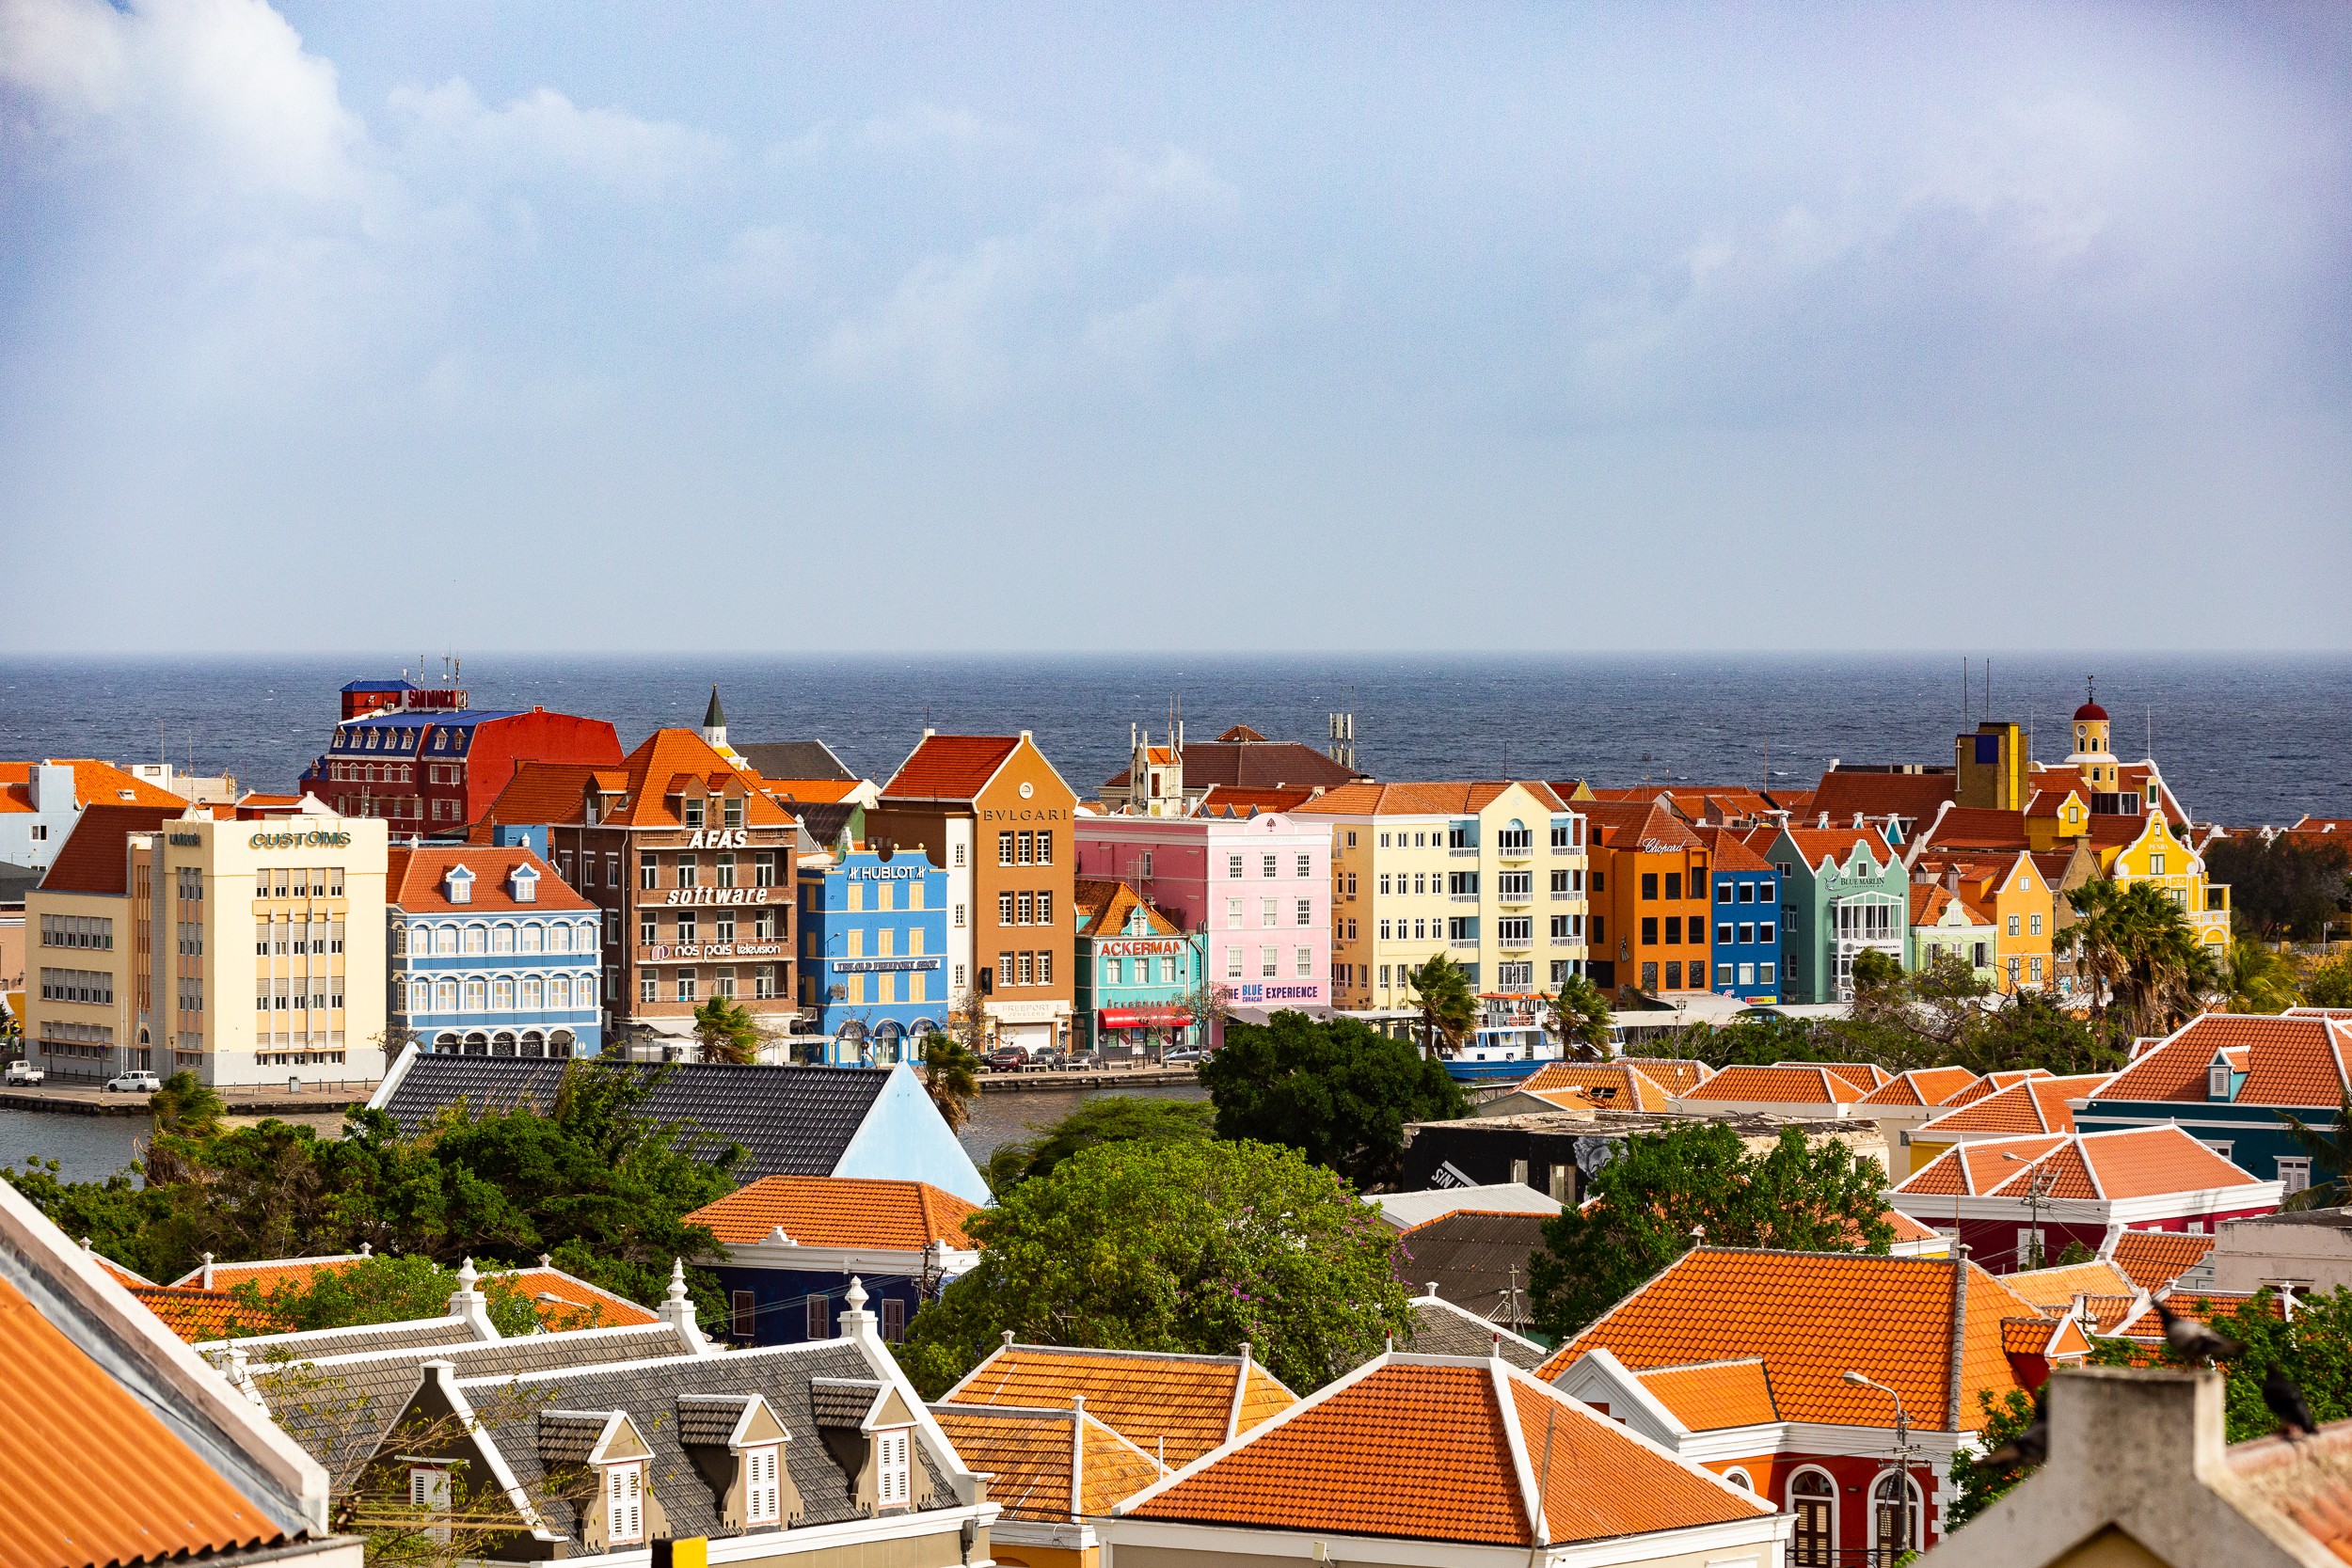 Curacao's capital, Willemstad, is known for its bright-coloured architecture, which embraces styles from the Netherlands and the Spanish and Portuguese colonial towns with which the city engaged in trade.